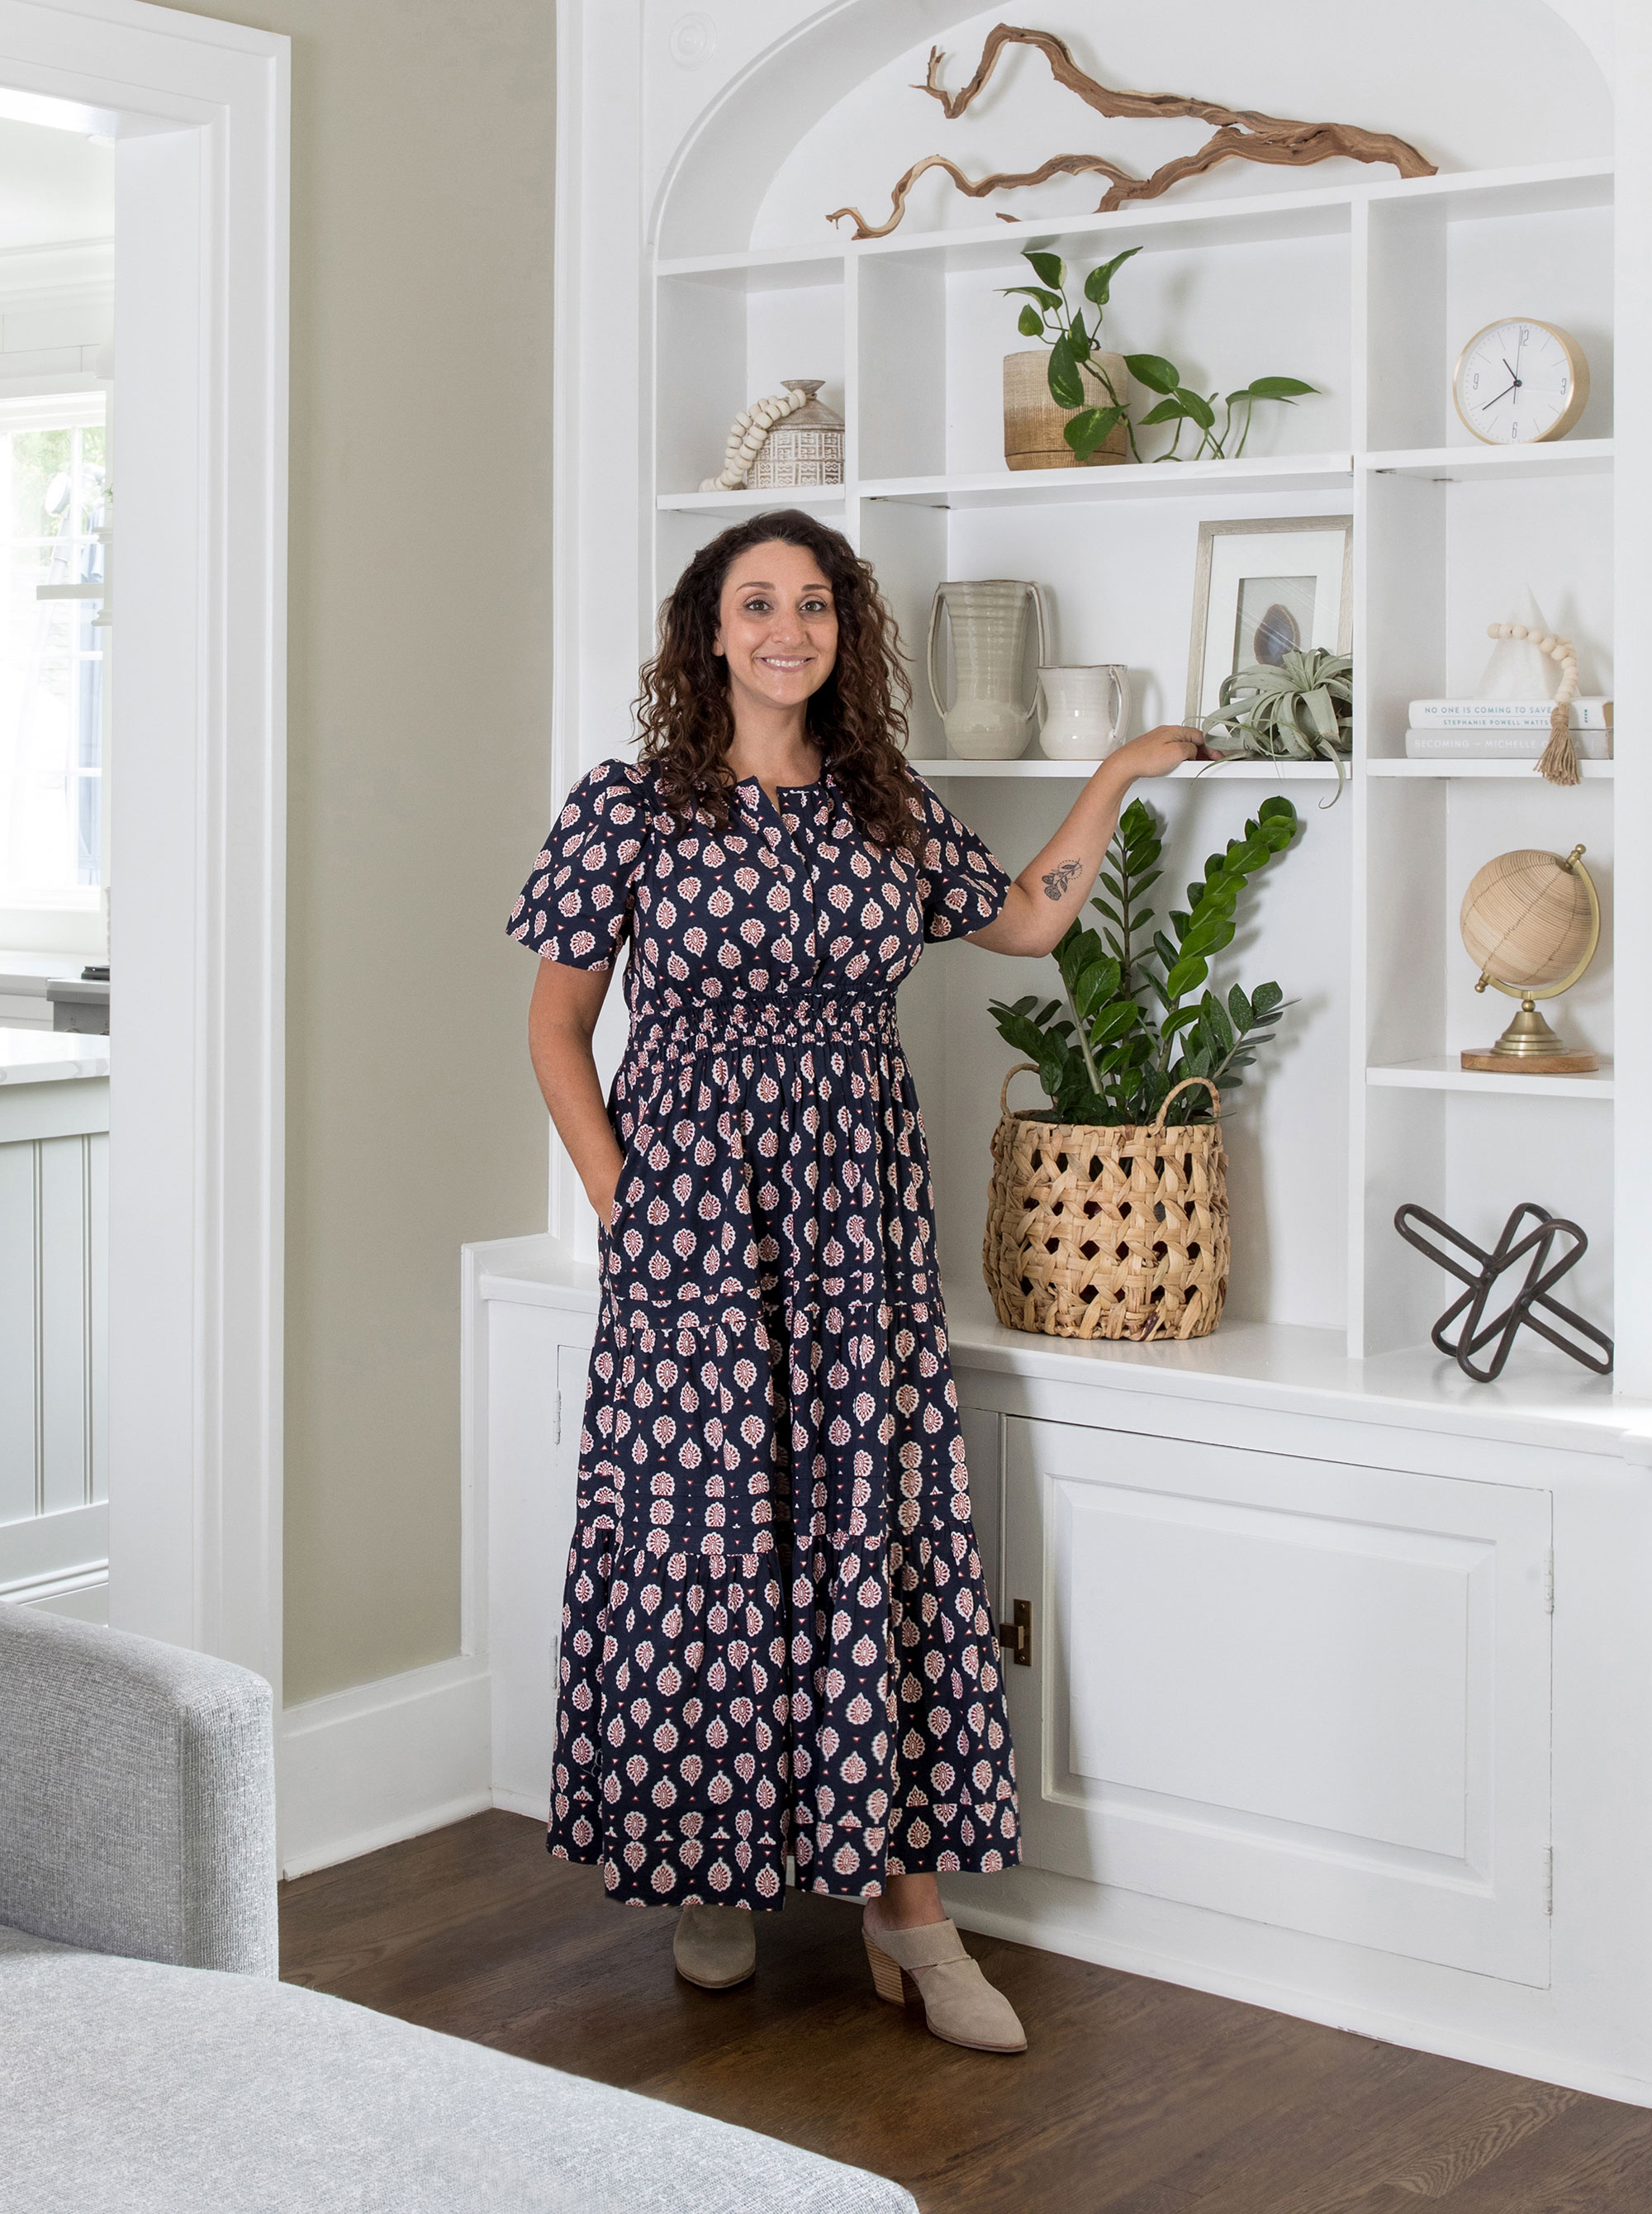 Danielle Chiprut designer in patterned dress standing in living room with alcove shelves